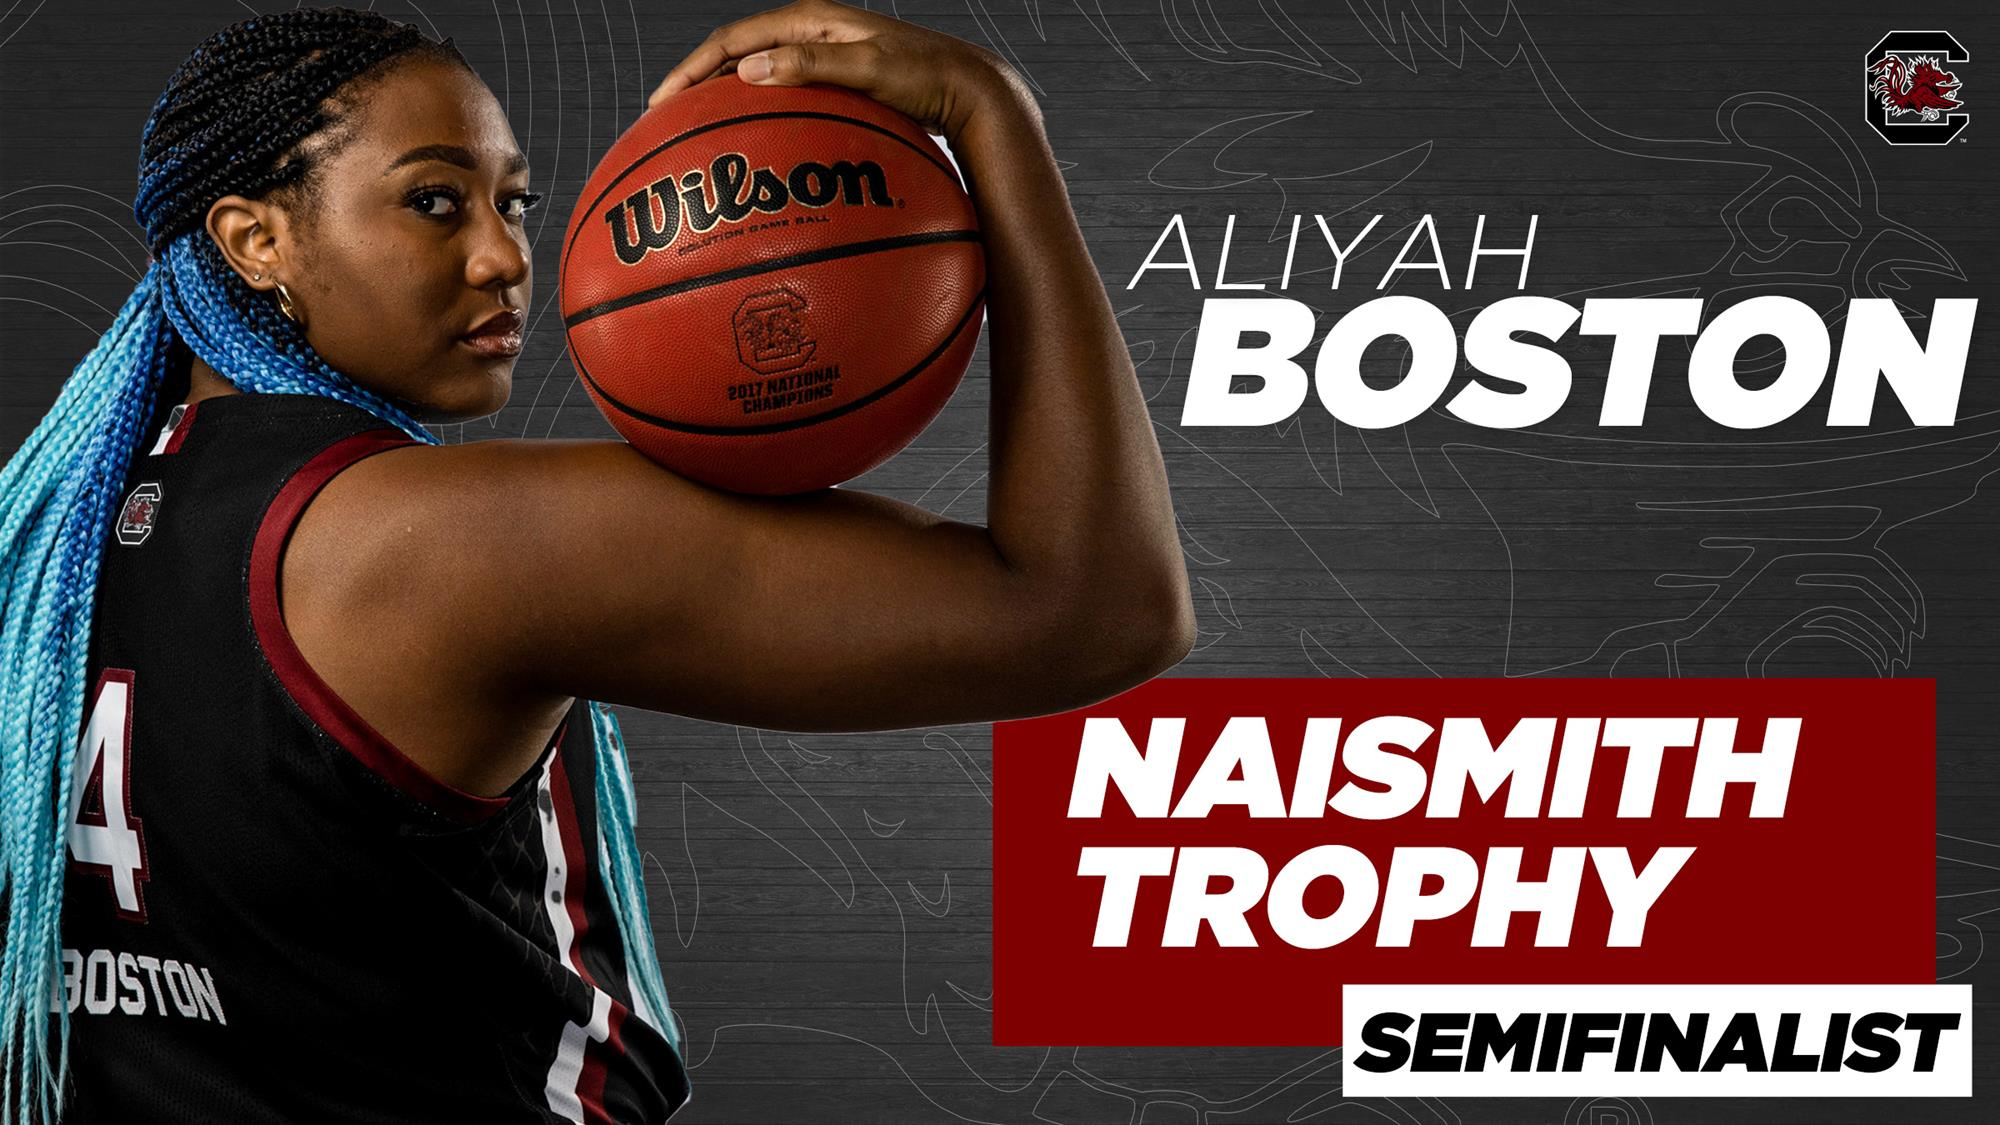 Boston Named a Semifinalist for Naismith Trophy